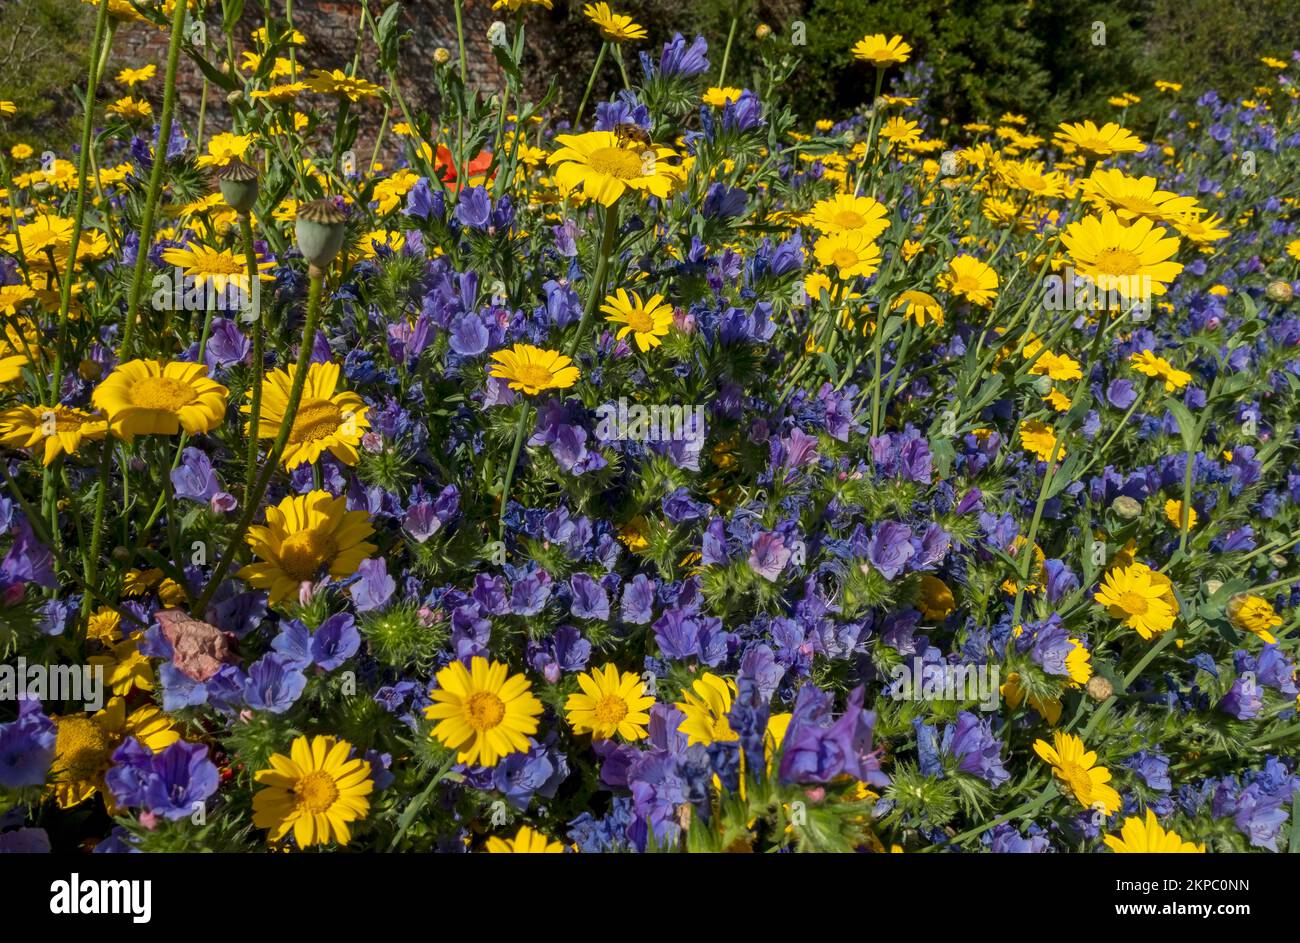 Close up of yellow corn marigolds and blue echium flowers flower growing in a wildflower meadow garden border in summer England UK GB Great Britain Stock Photo